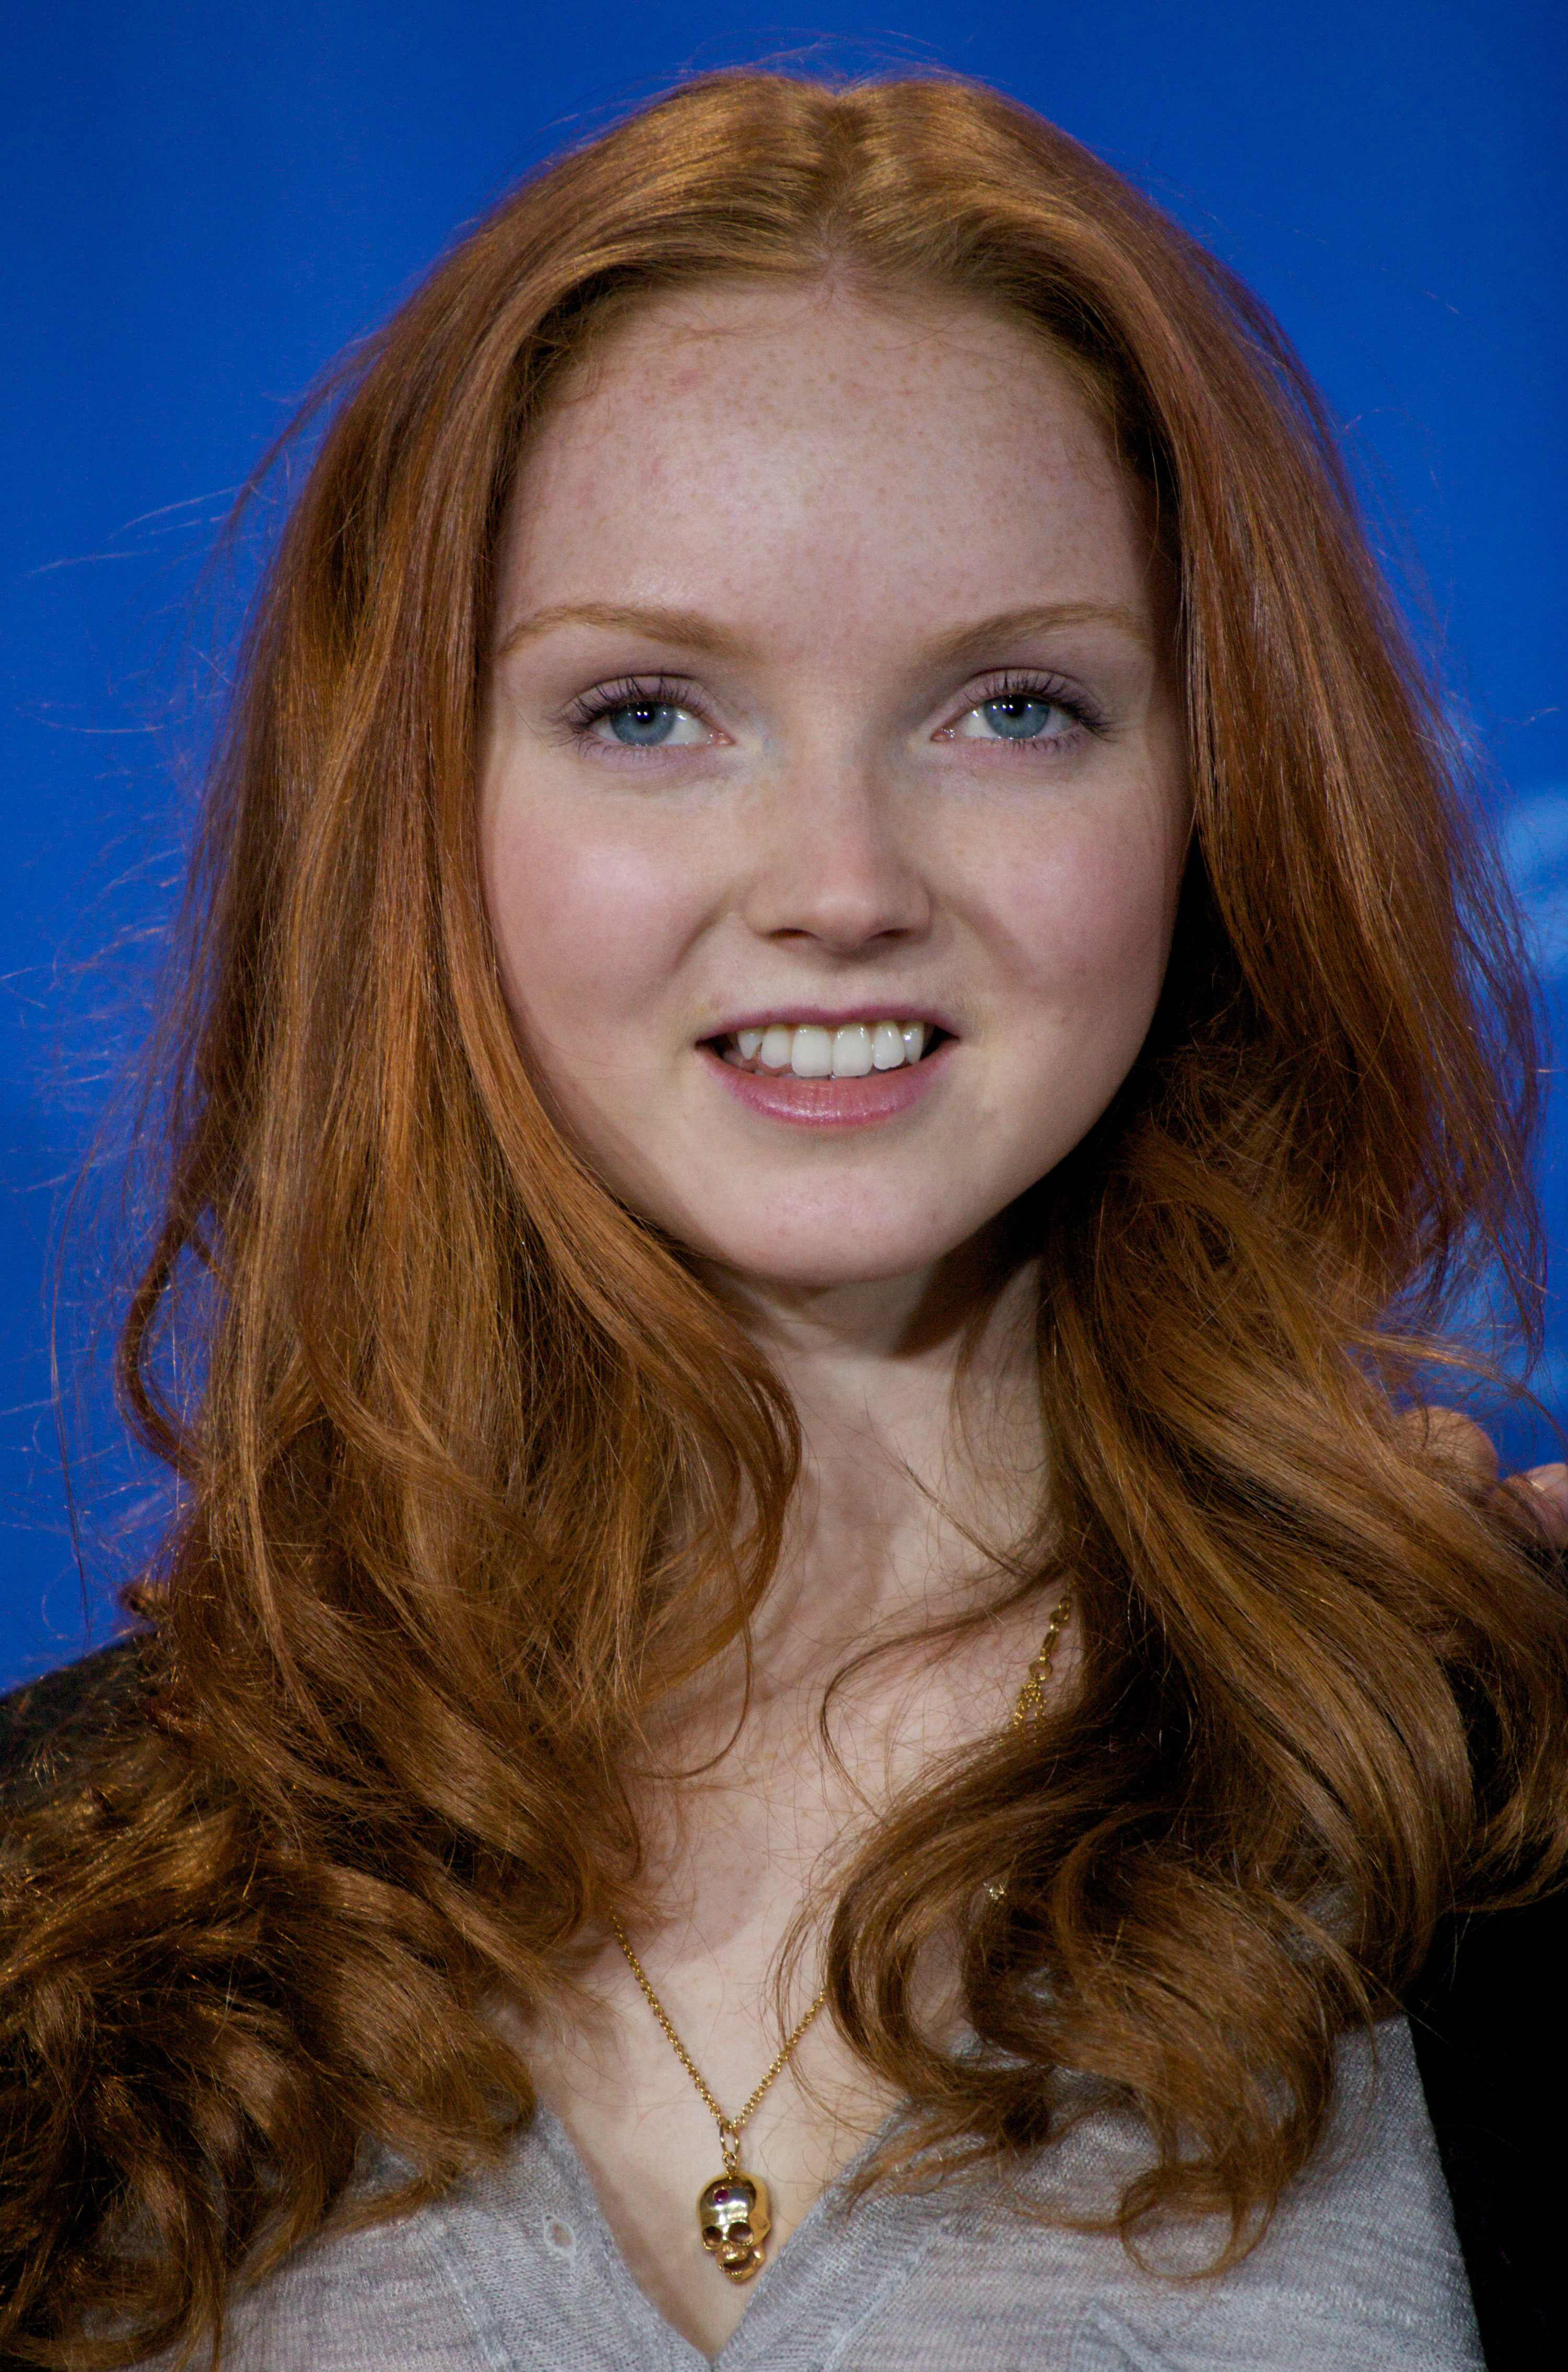 Lily Cole #16